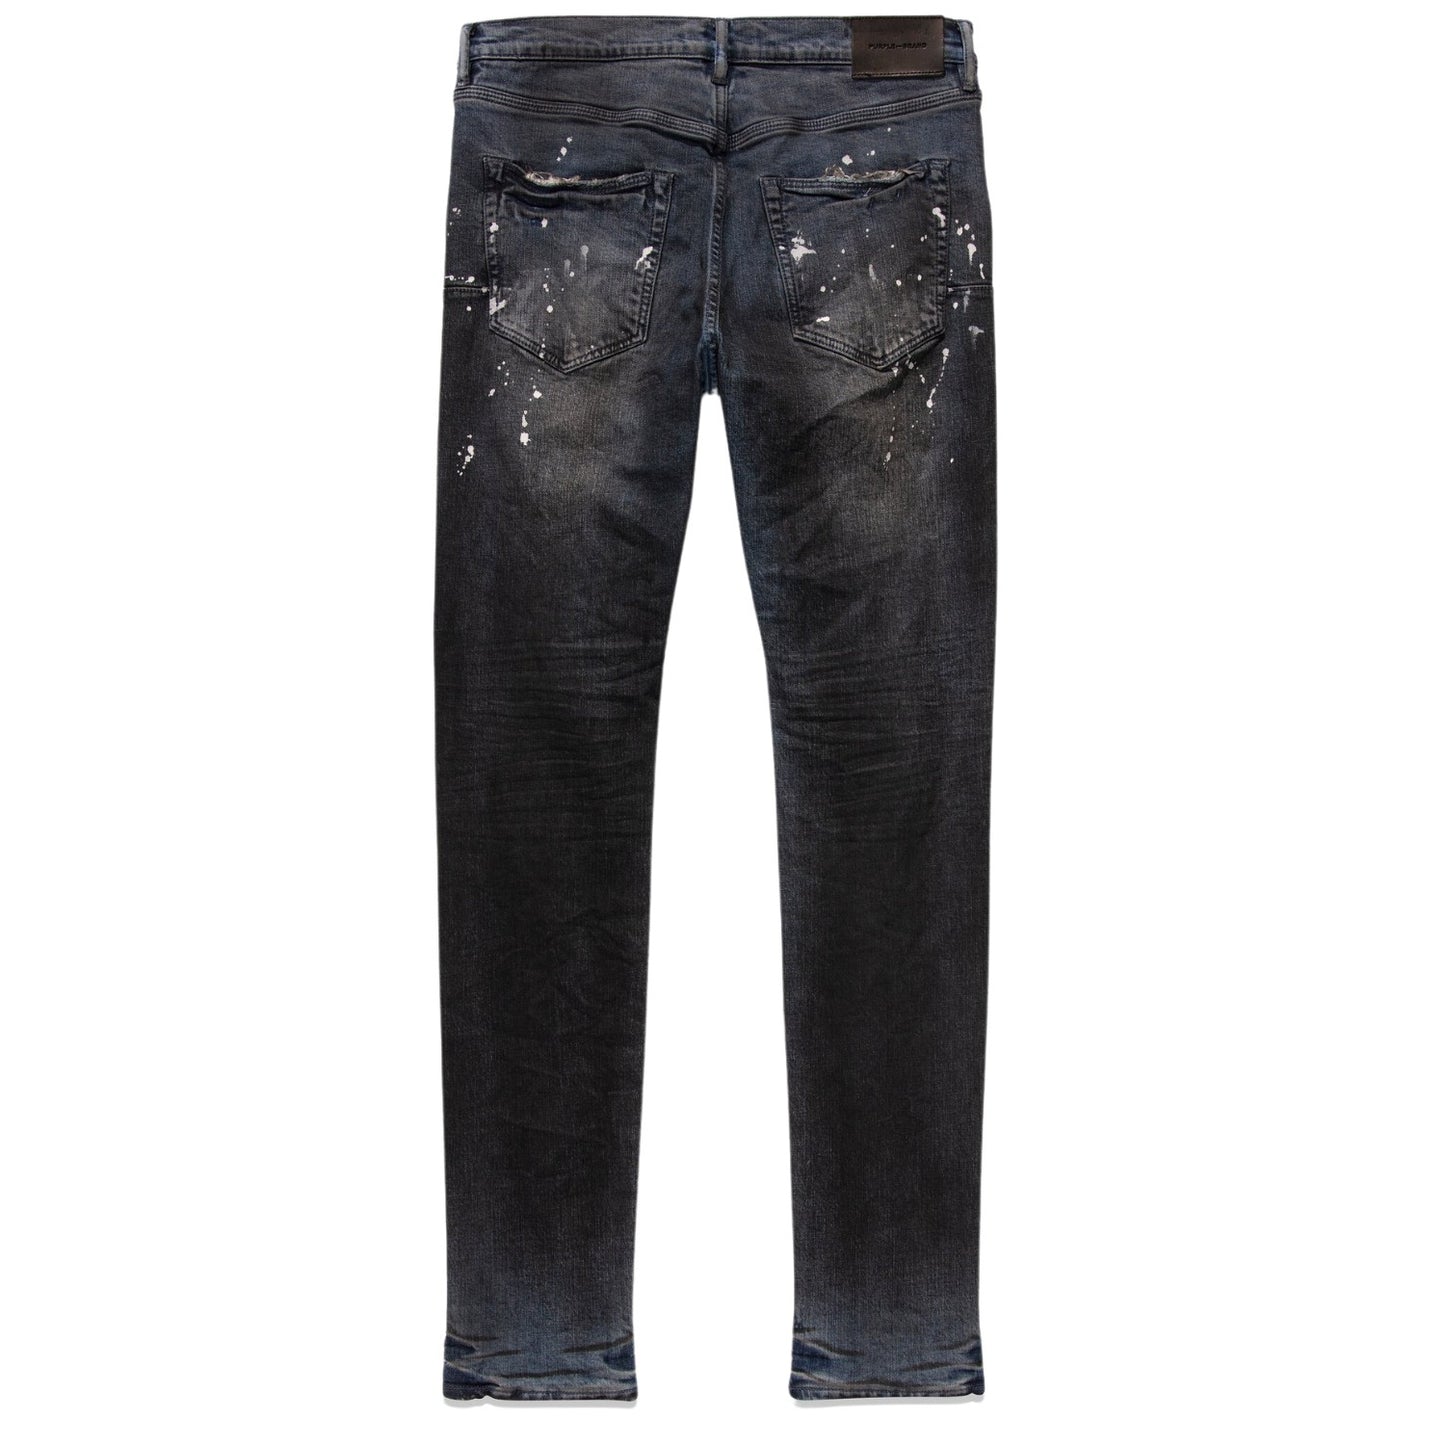 Purple-brand Painters Waxed Jeans Mens Style : P001-pwin123